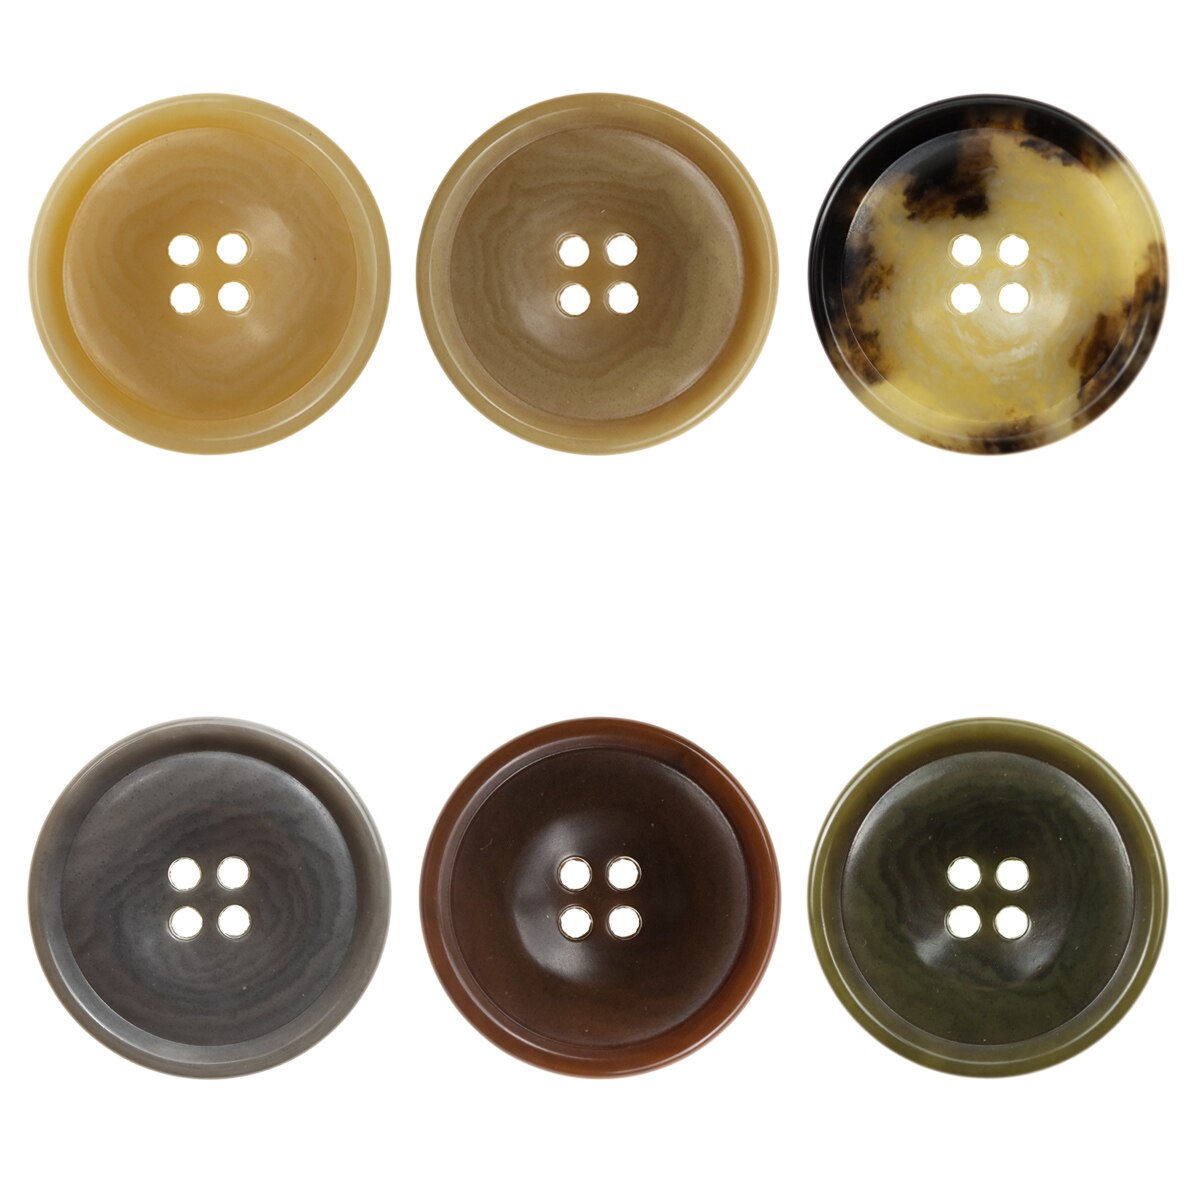 High Quality Urea Buttons 4 Hole Round Imitation Horn and Corozo Buttons